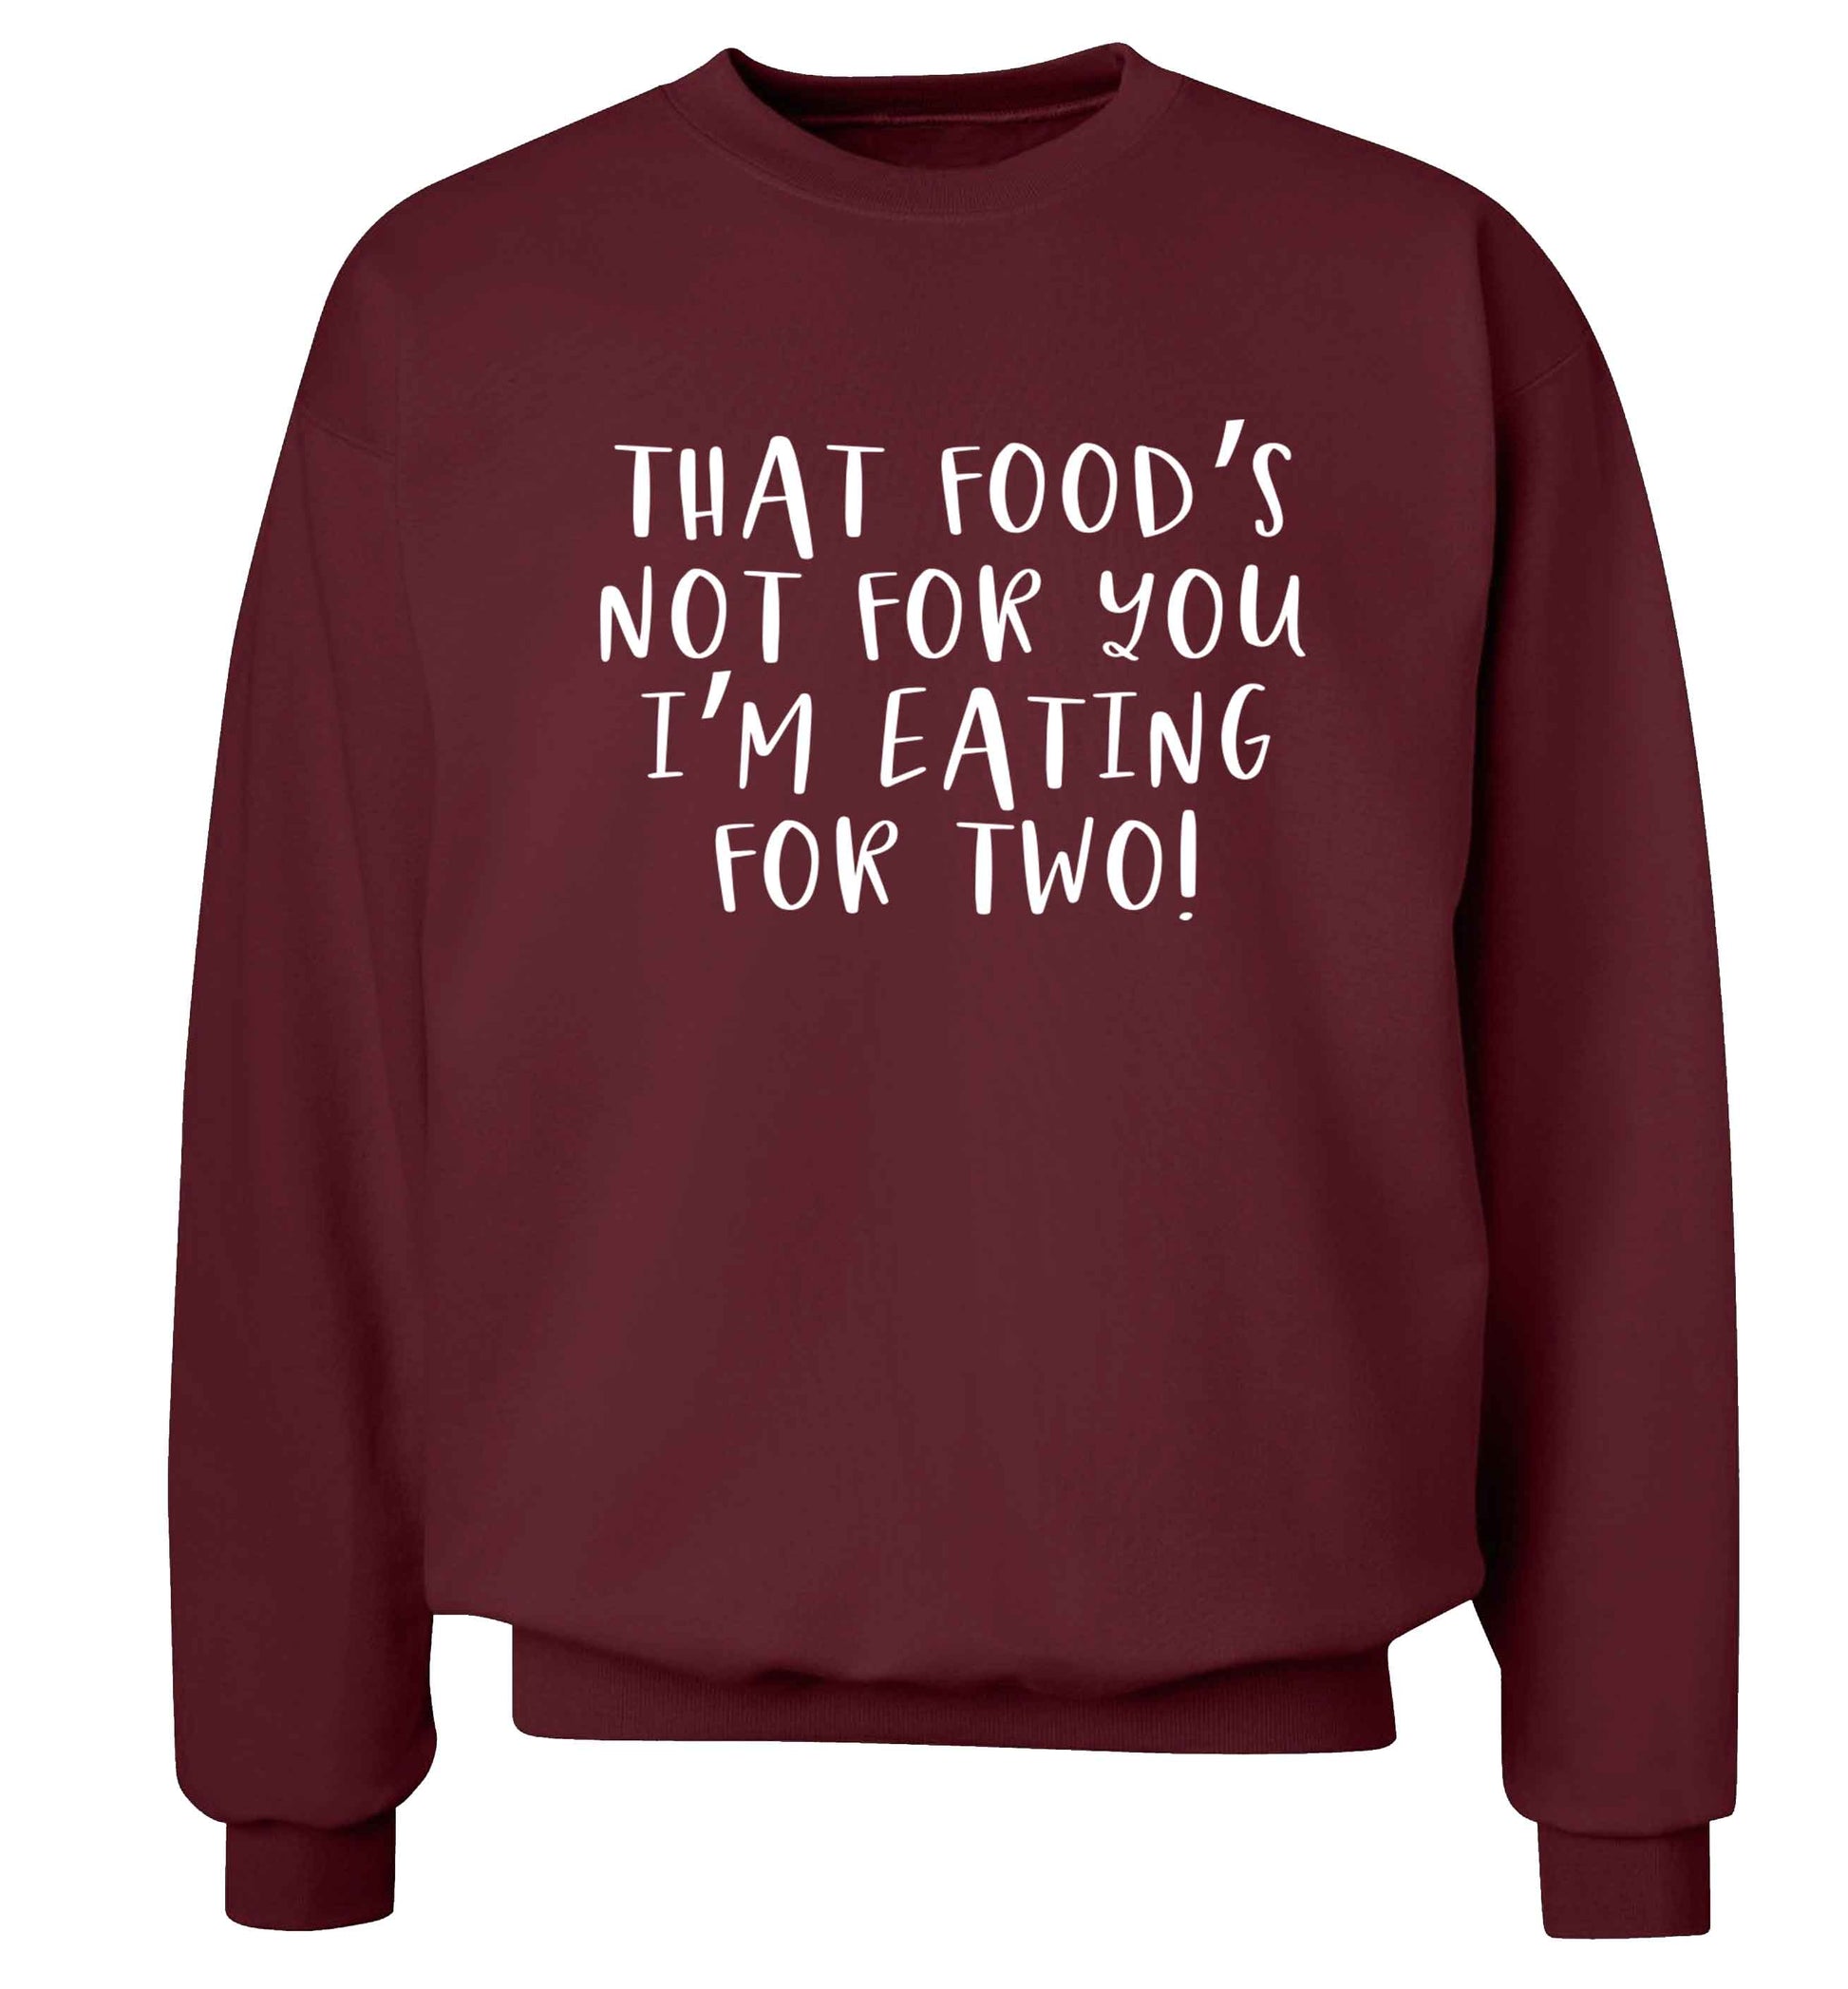 That food's not for you I'm eating for two Adult's unisex maroon Sweater 2XL